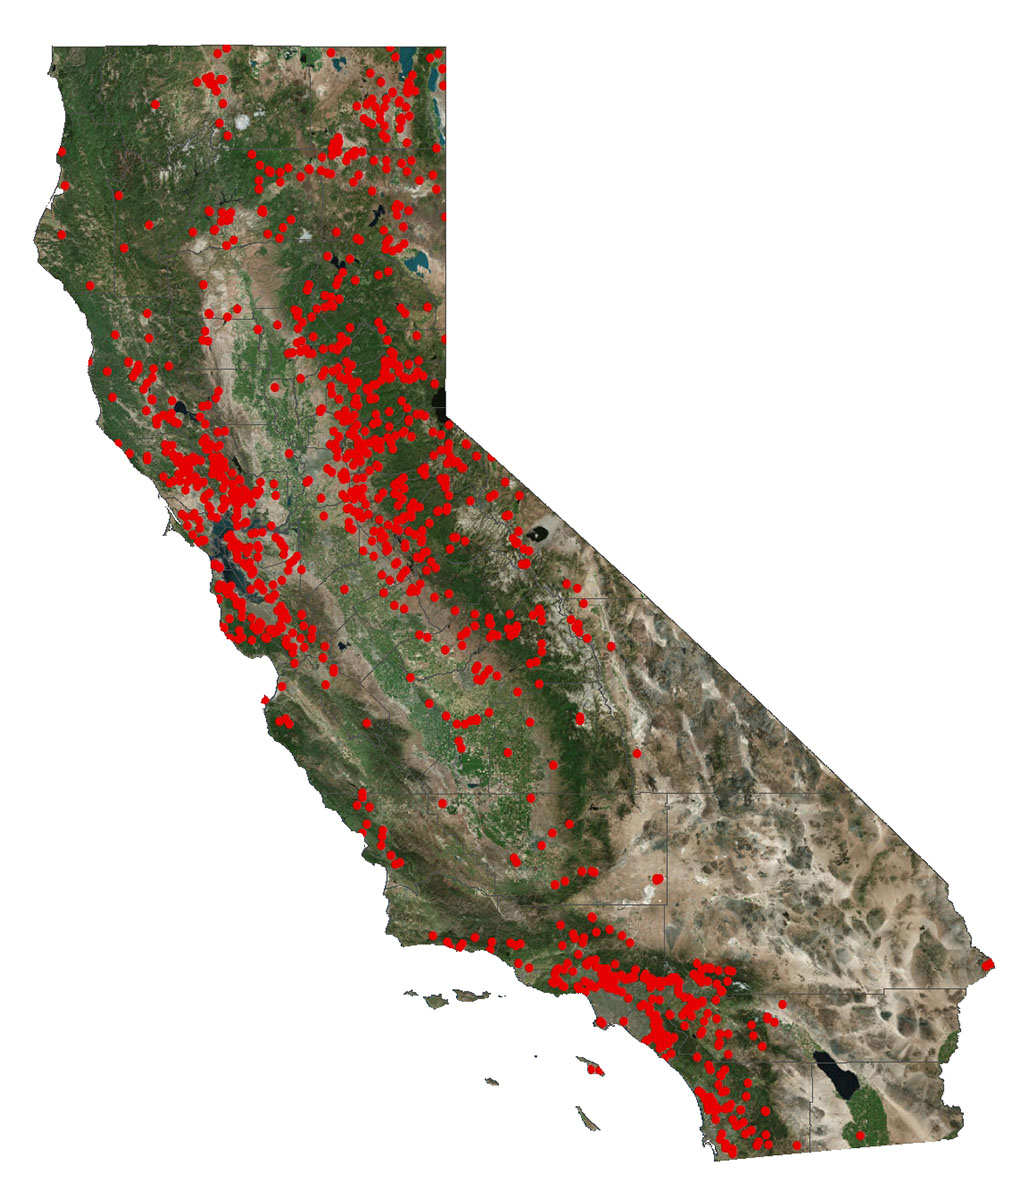 A map of the State of California with red dots marking the location of jurisdictional dams. For additional information, call 916-565-7868